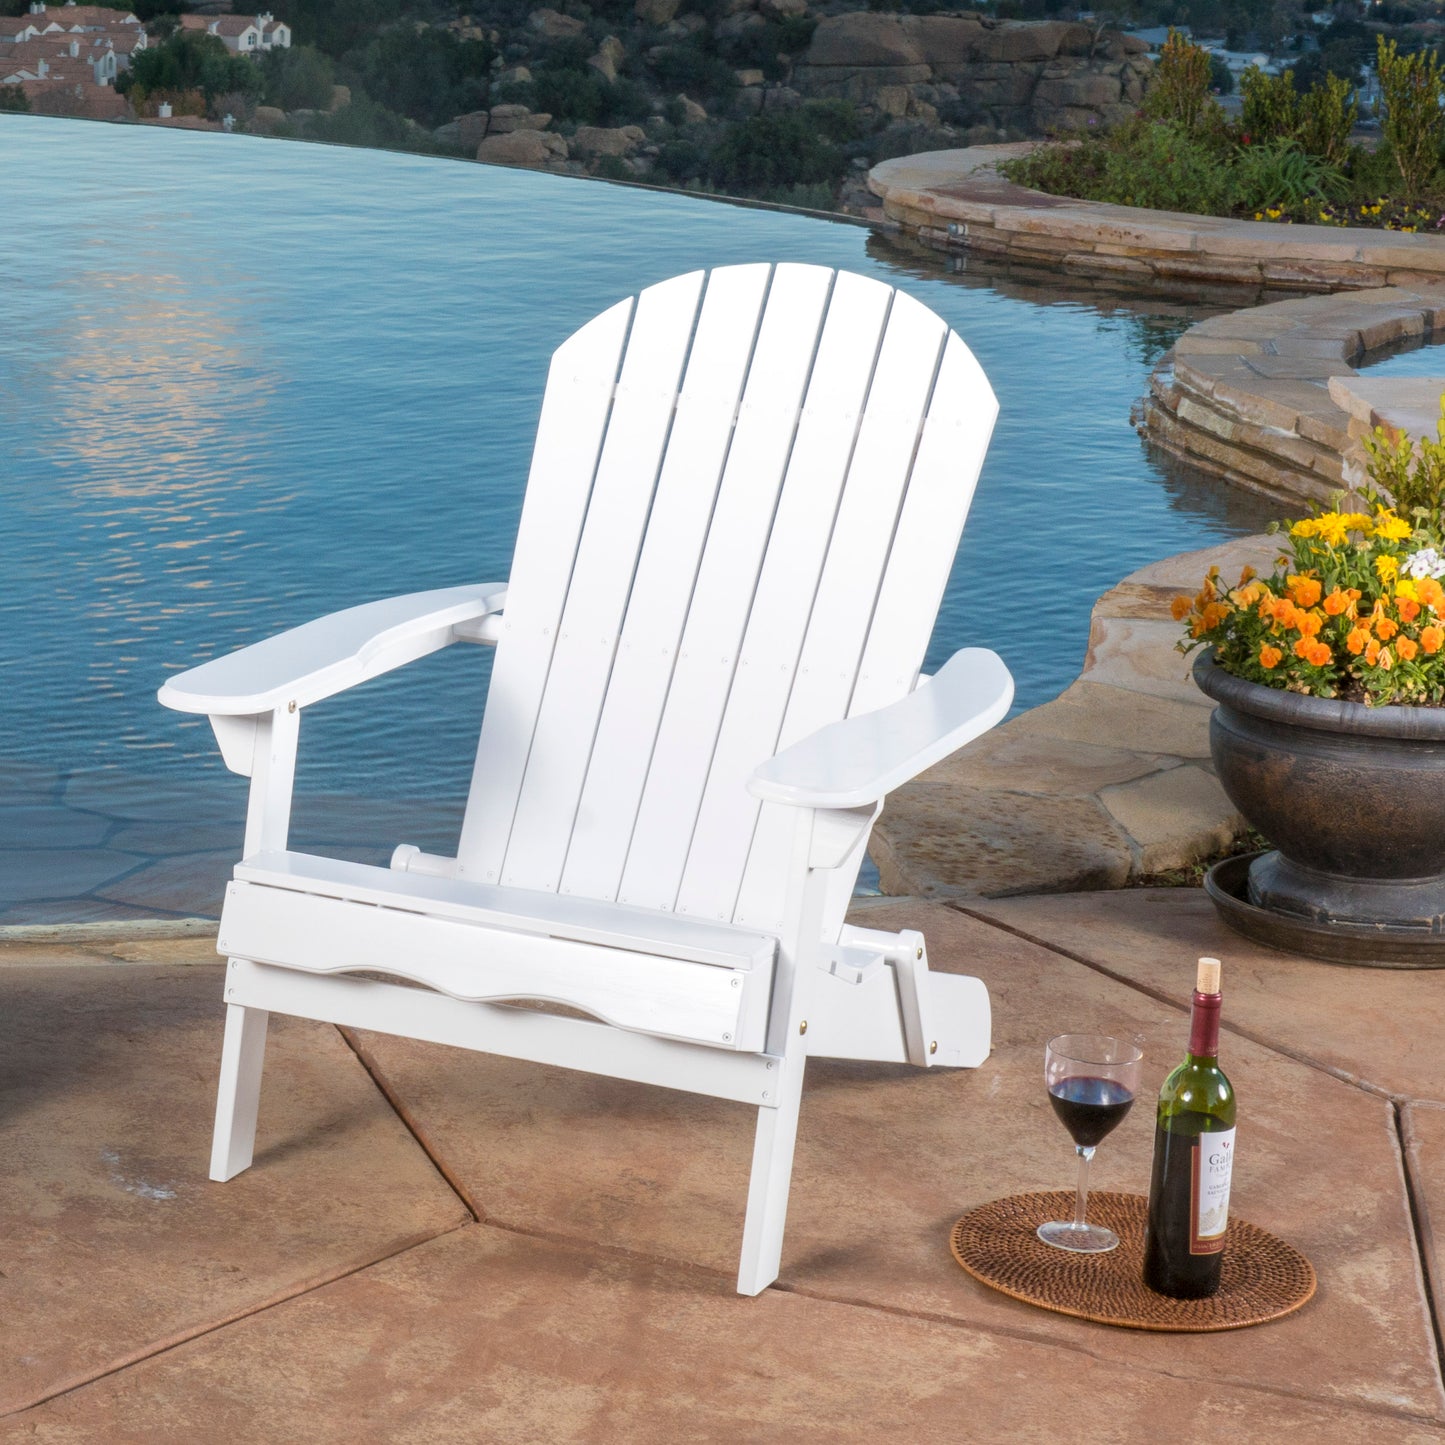 Kono Outdoor Acacia Wood Reclining Adirondack Chair with Footrest